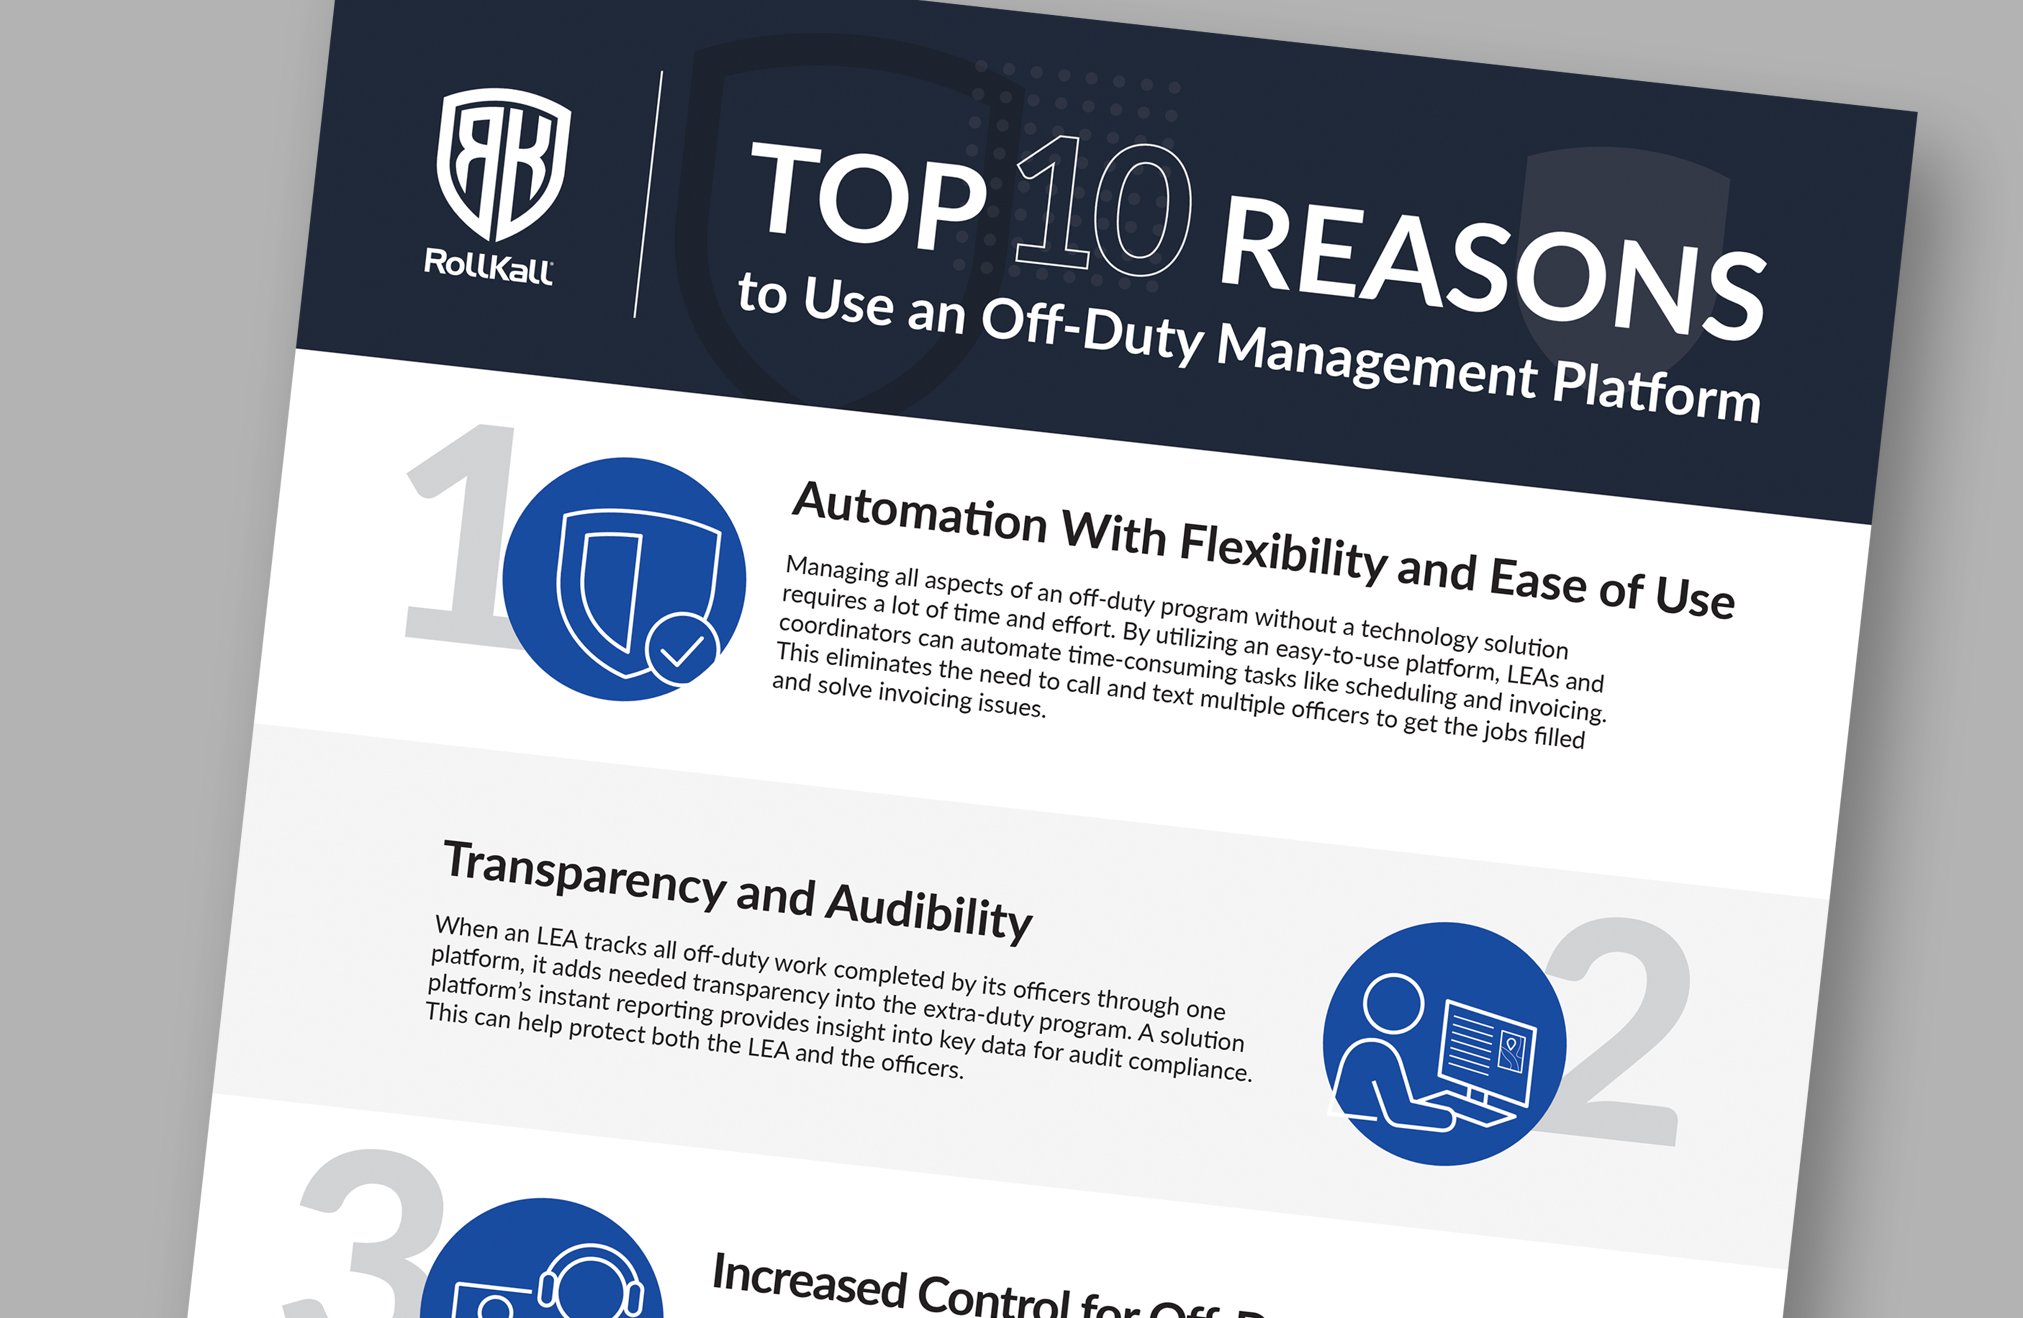 Top 10 Reasons To Use an Off-Duty Management Platform